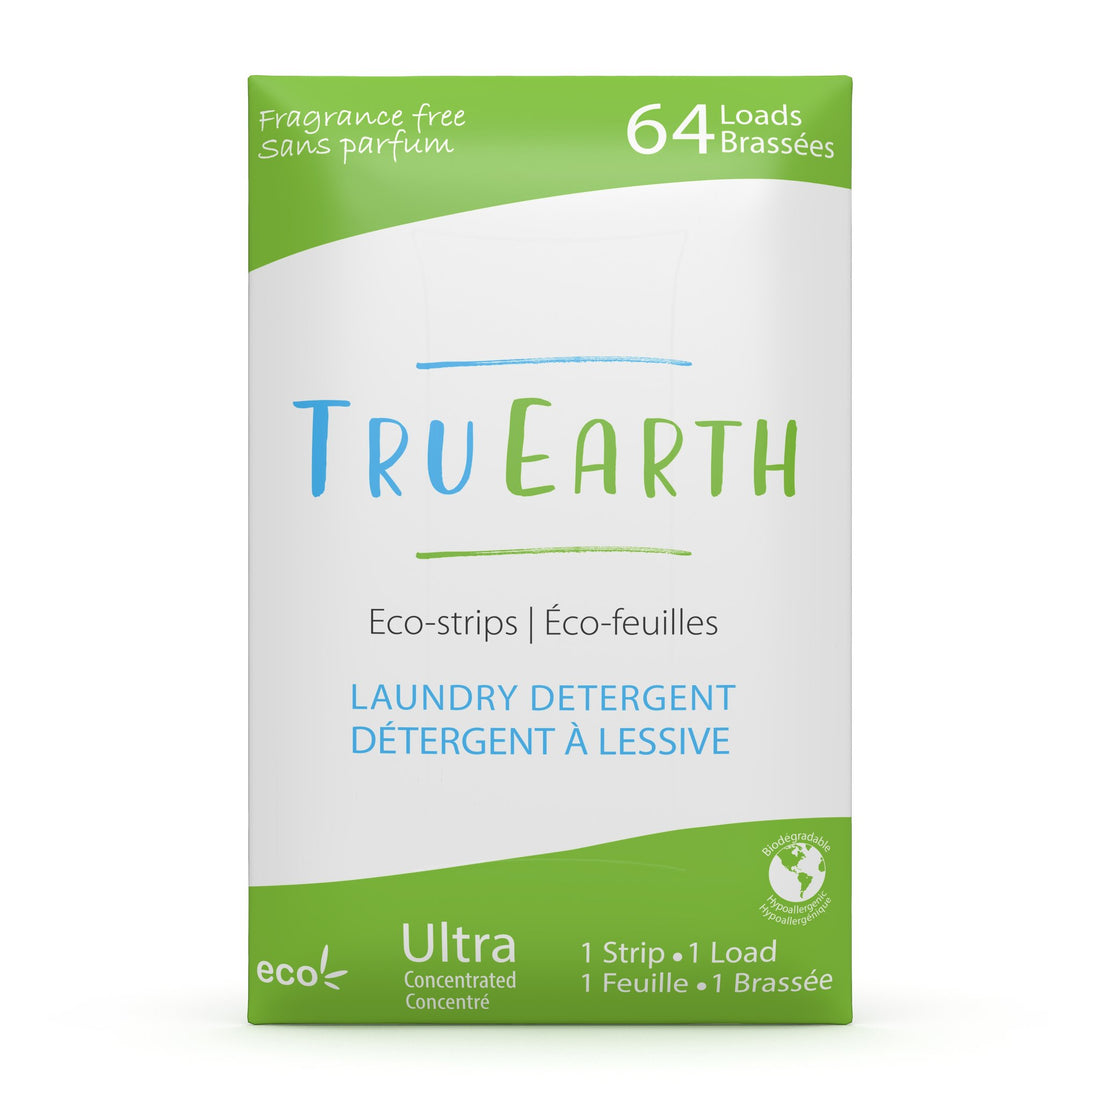 Laundry Detergent Eco-strips - Fragrance Free